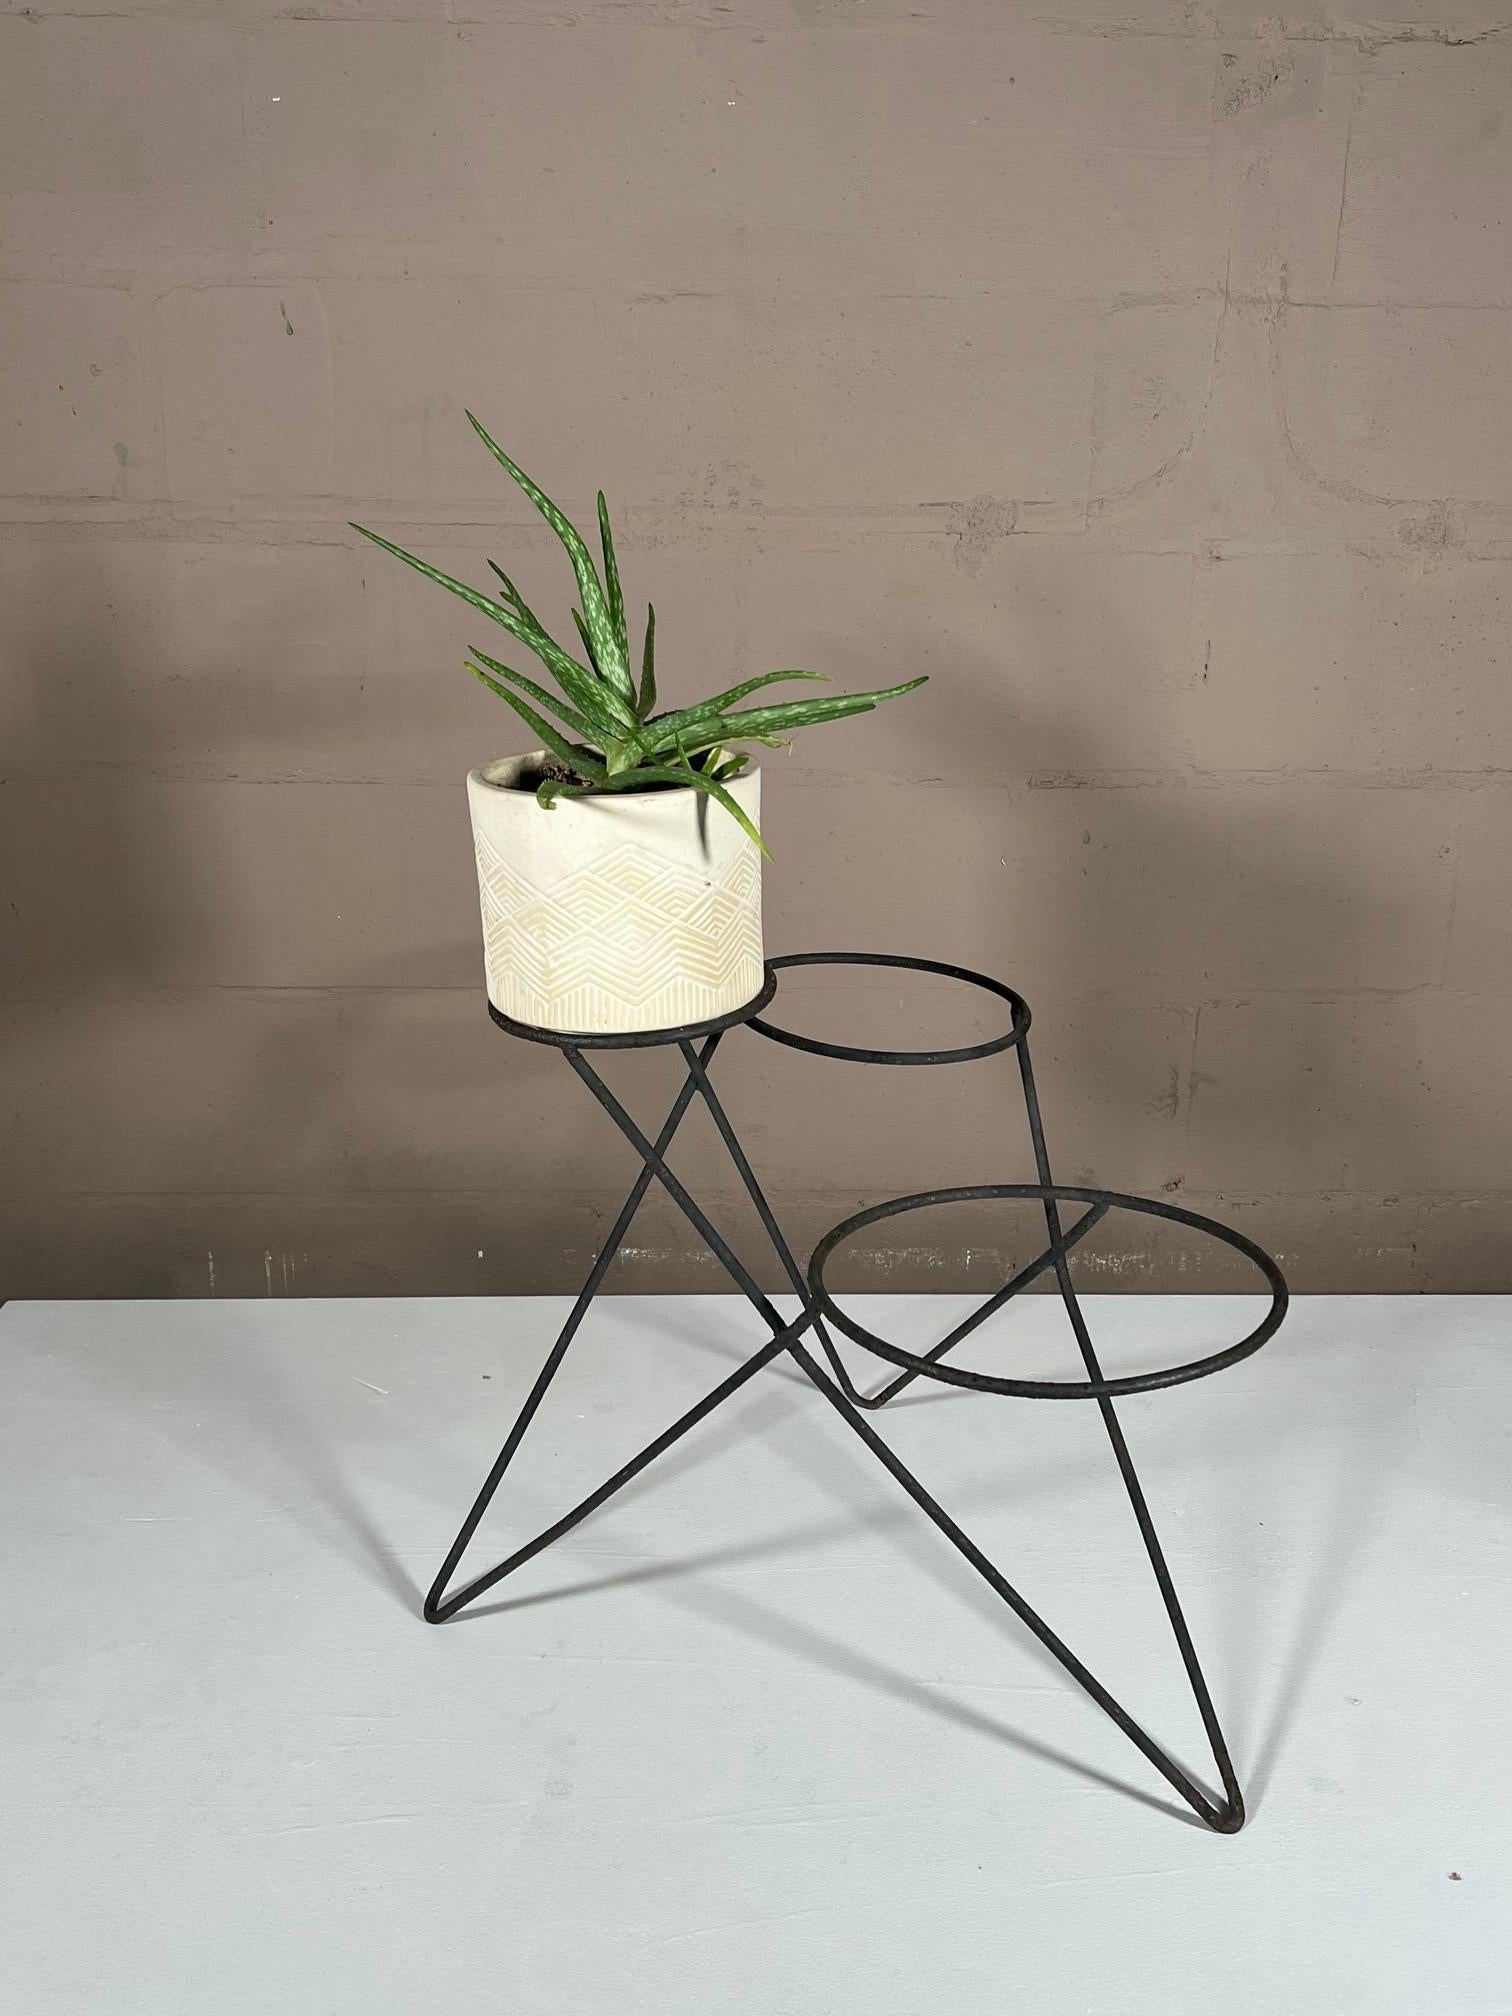 North American Modernist Planter by Architect Victor Bisharat For Sale